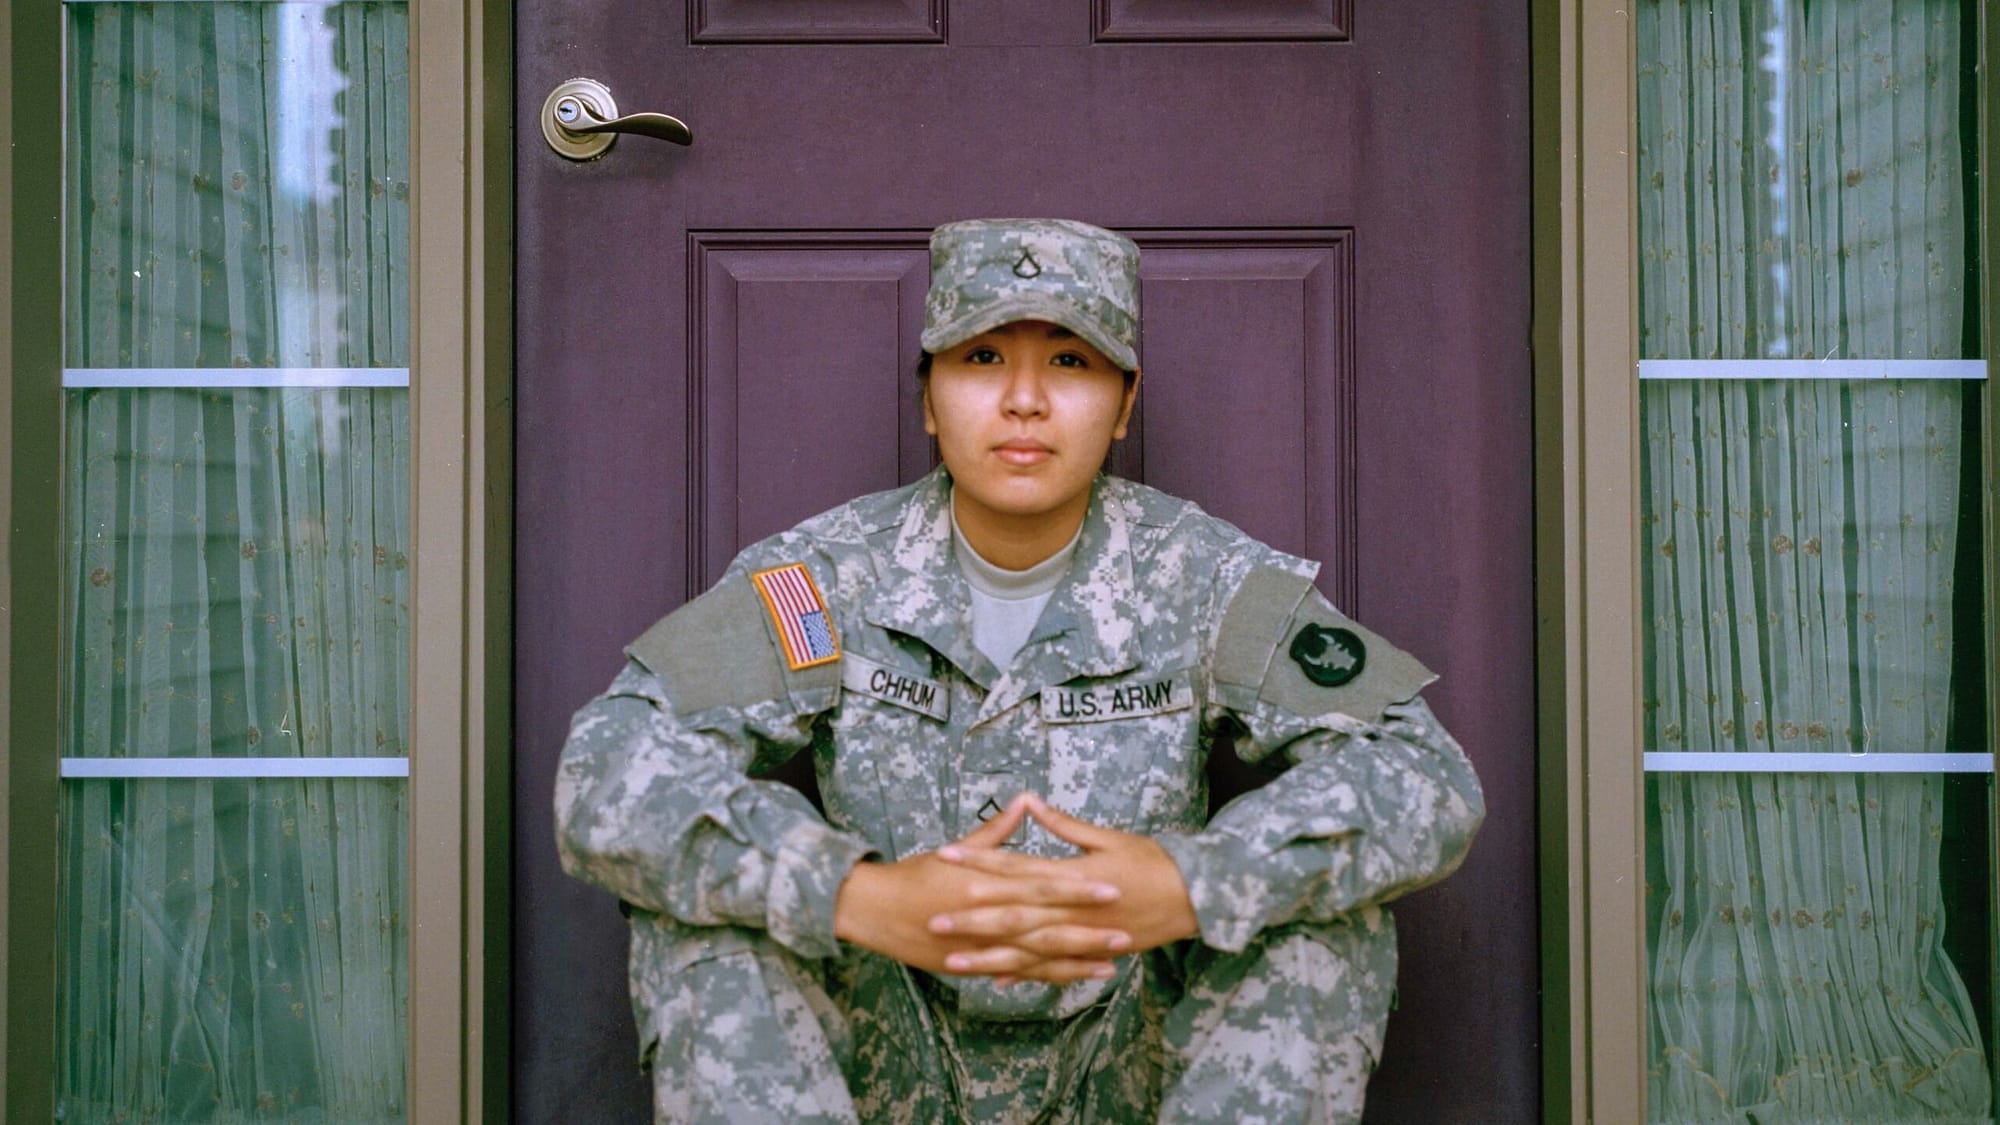 Image: A veteran of the US Army sitting in front of a purple door.